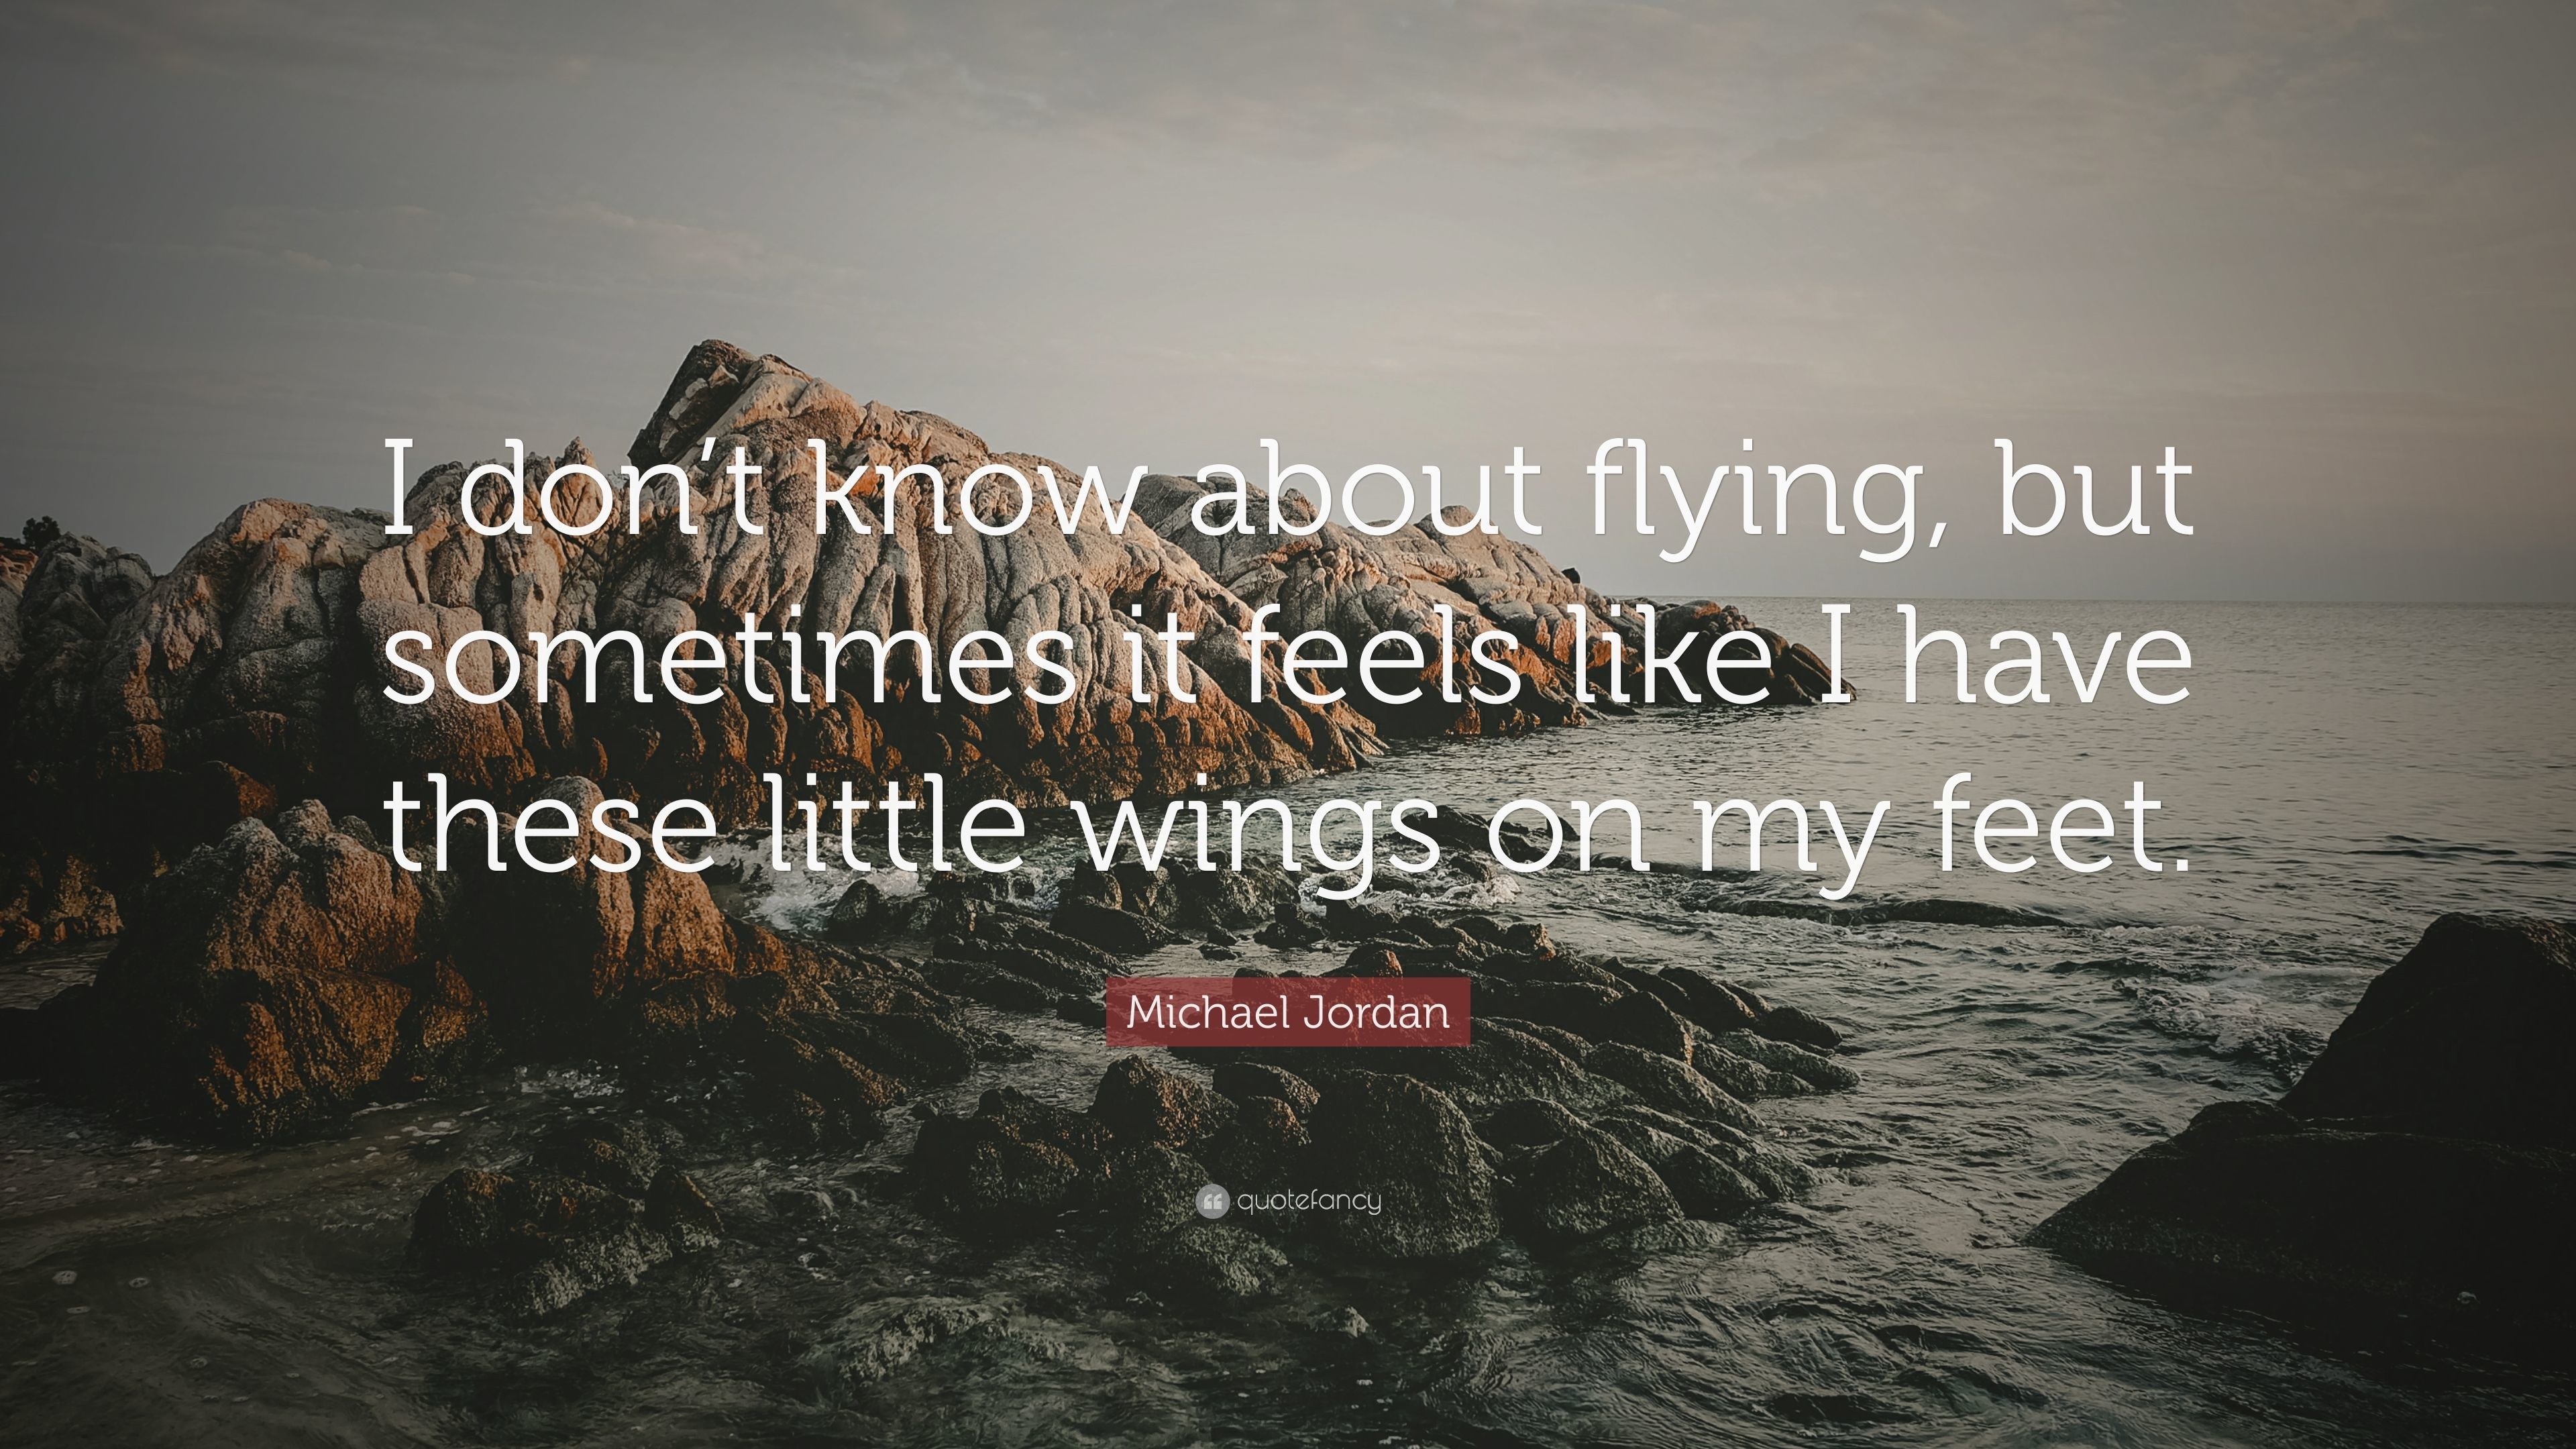 3840x2160 Michael Jordan Quote: “I don't know about flying, but sometimes it